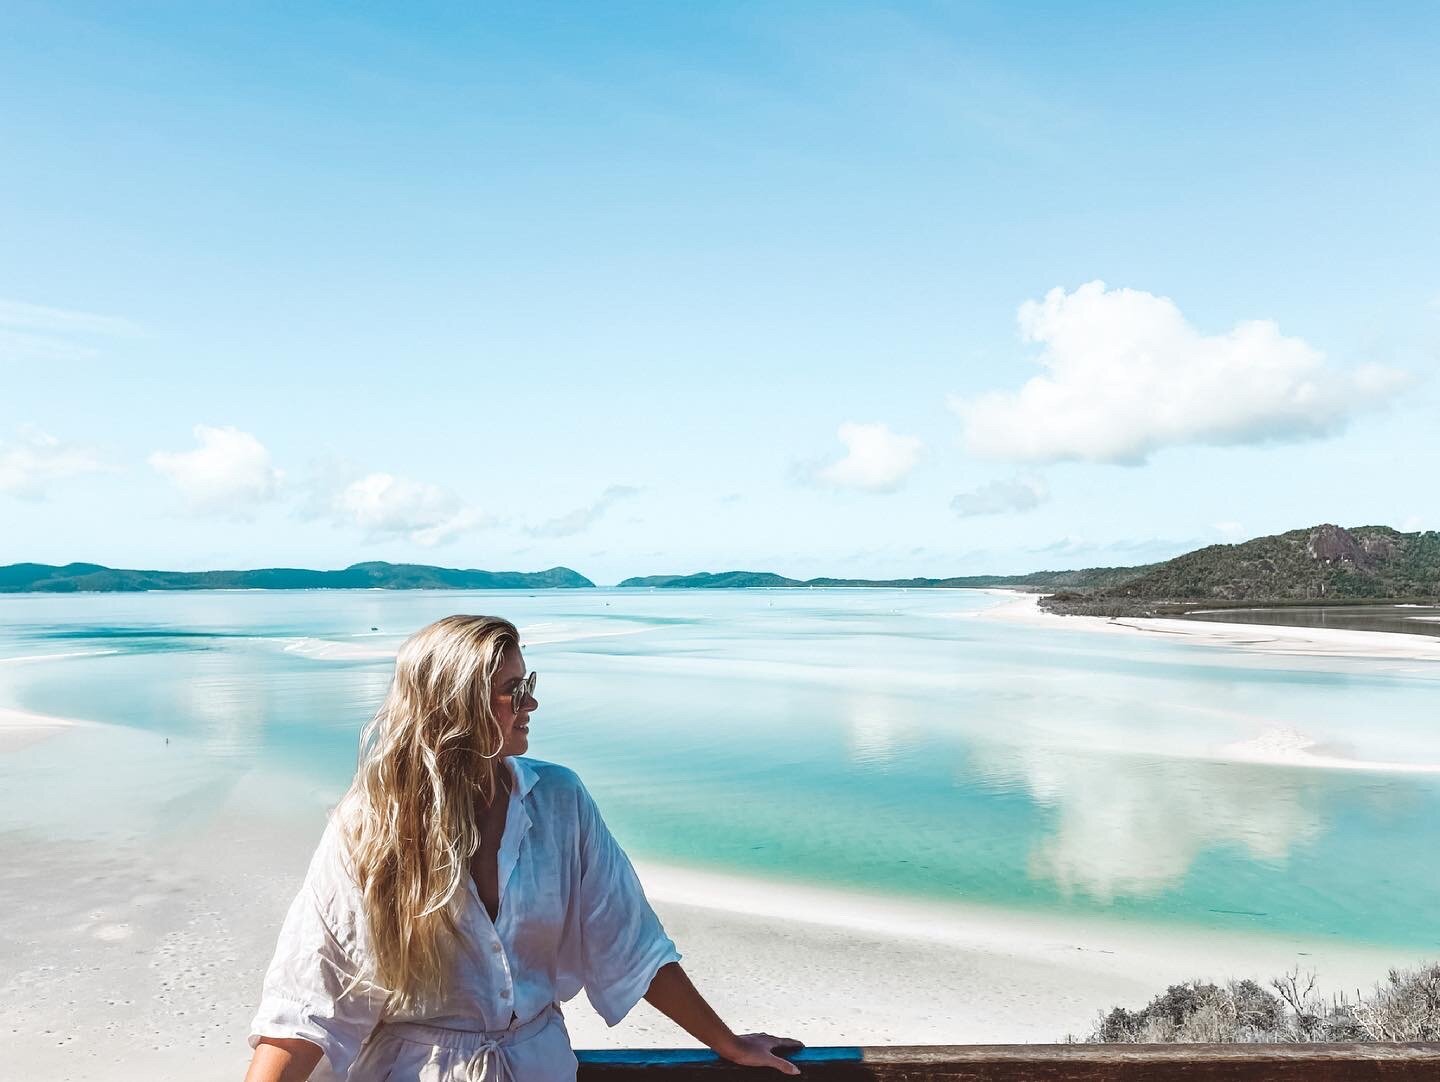 Whitehaven Beach - Hill Inlet Lookout - Airlie Beach - Whitsundays - Tropical North Queensland (QLD) - Australie